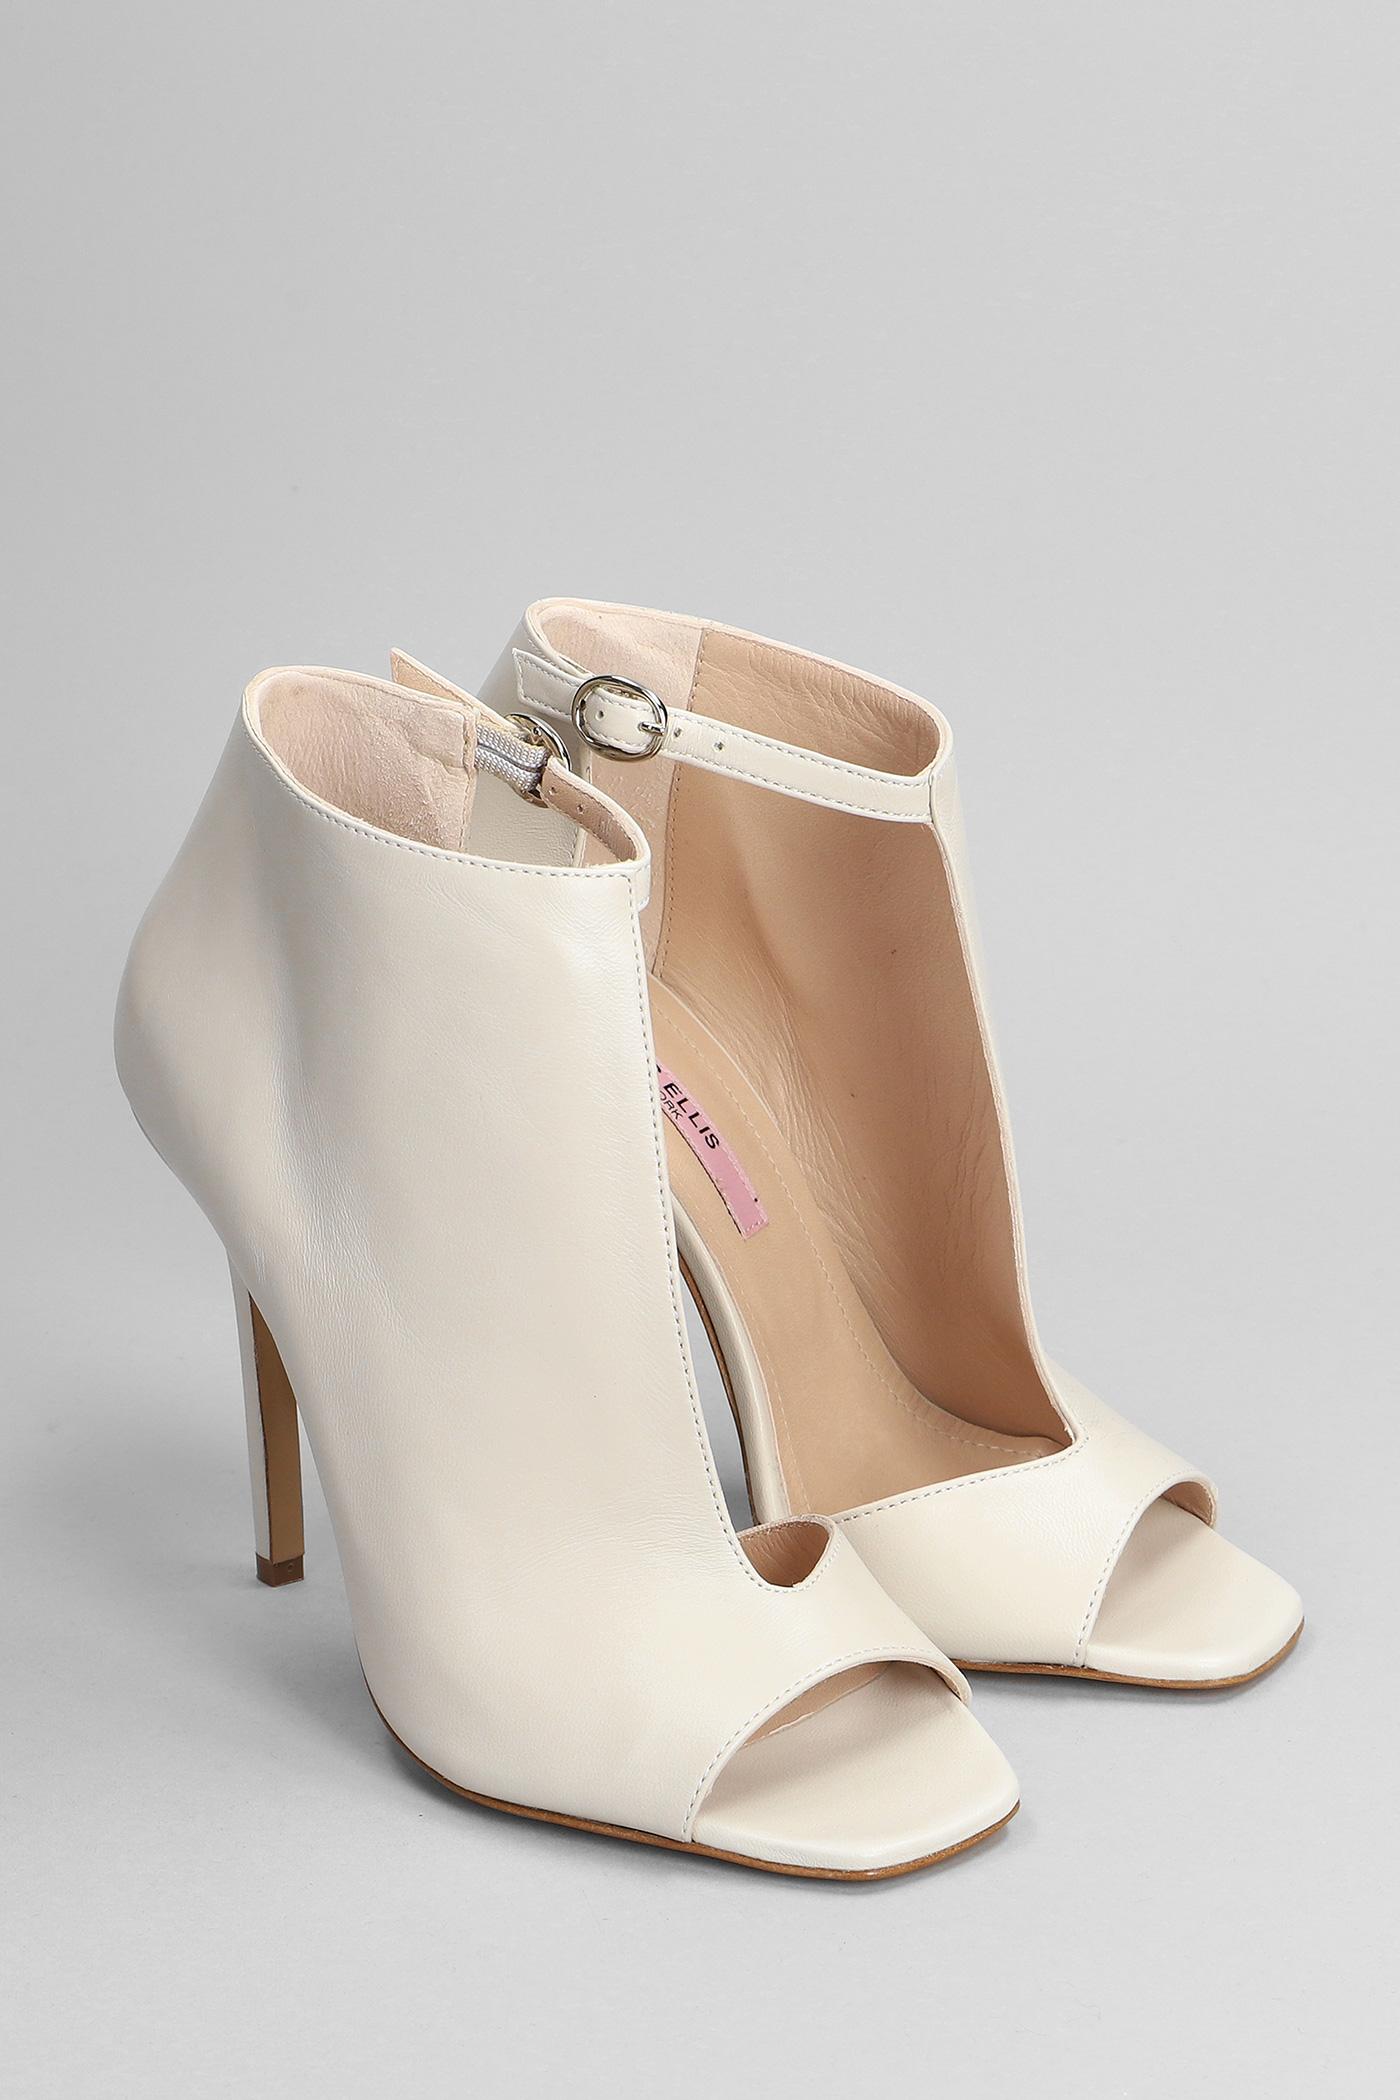 Marc Ellis High Heels Ankle Boots In White Leather | Lyst